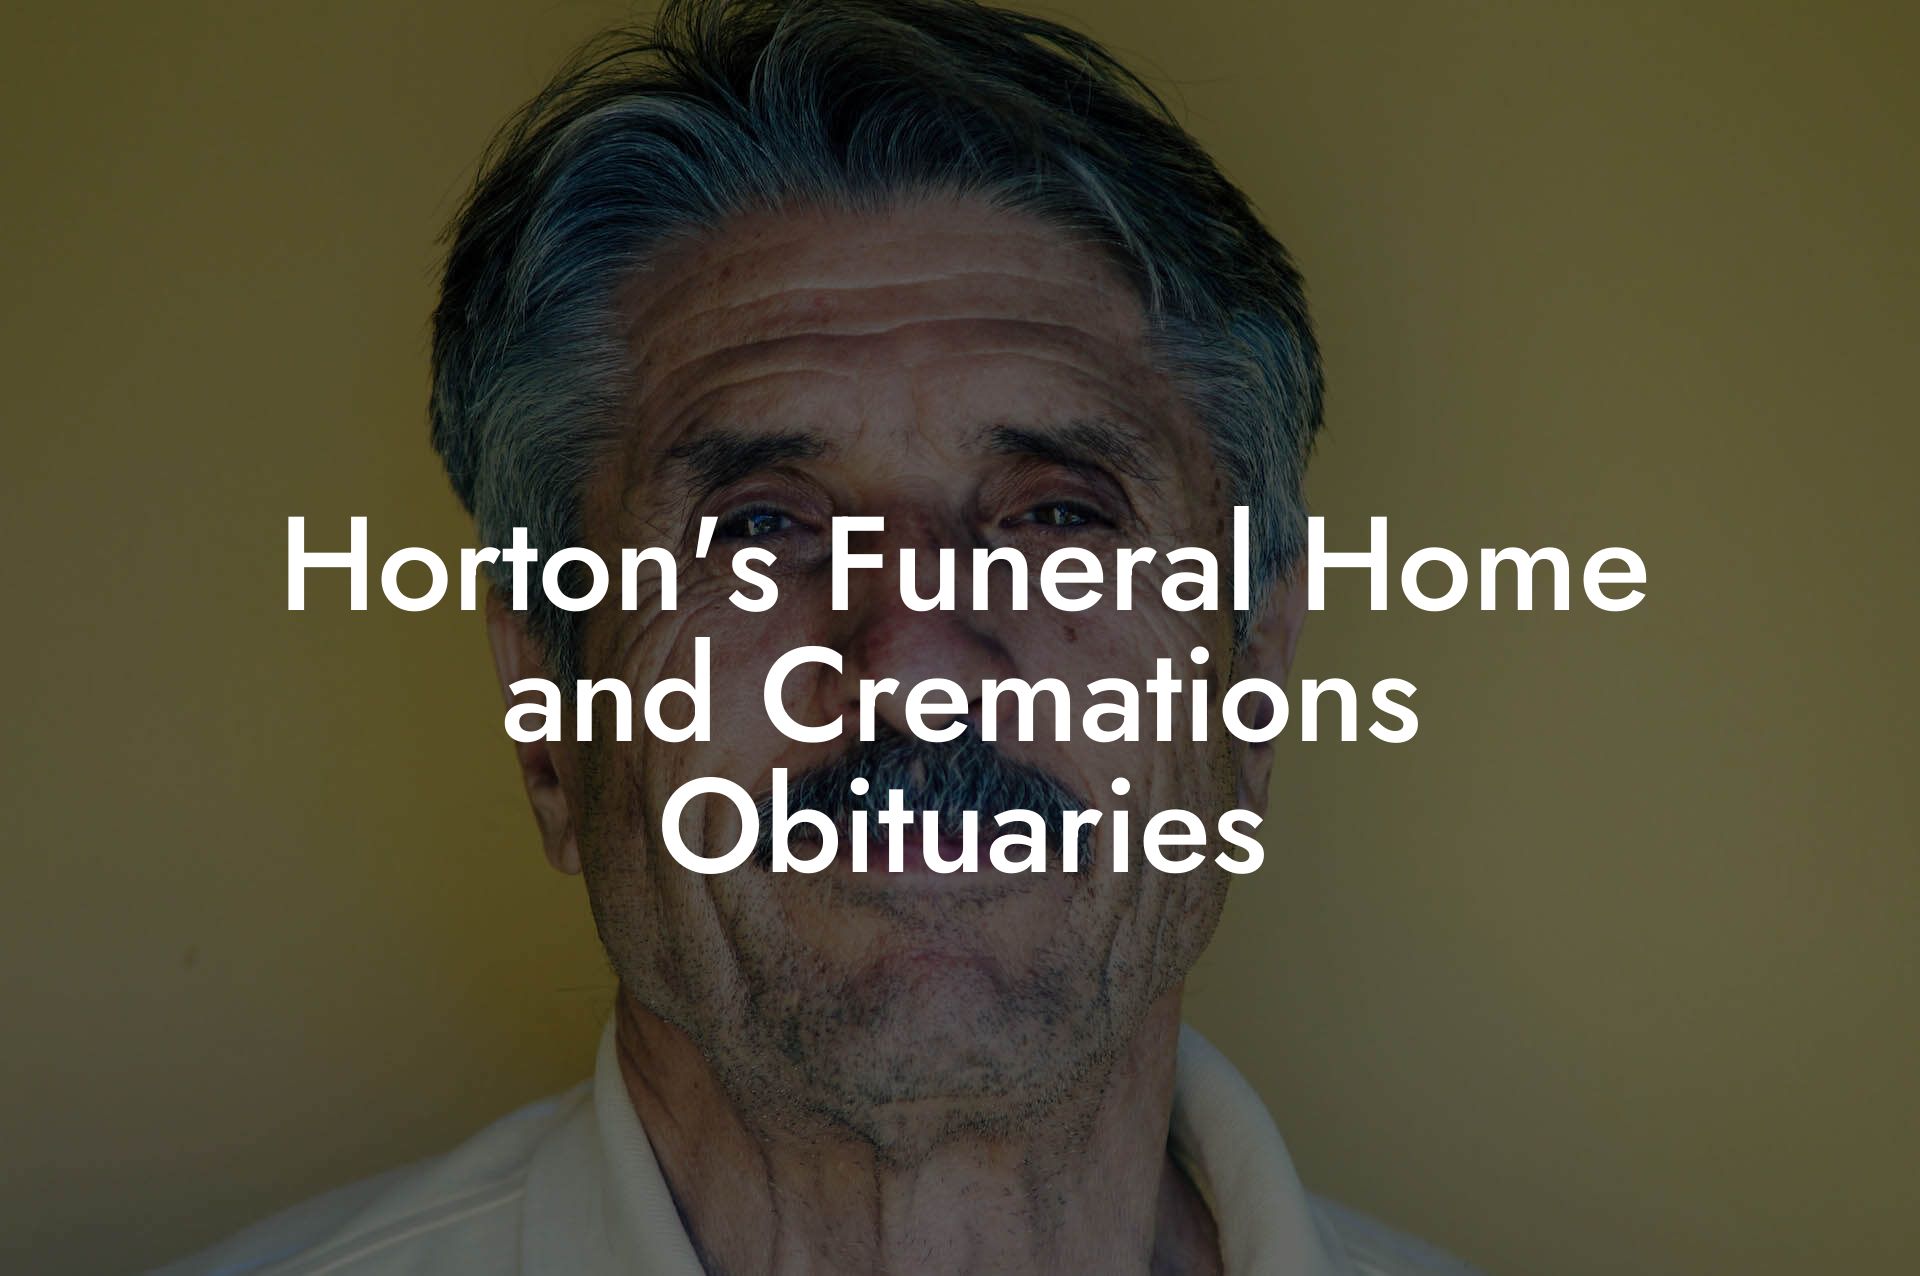 Horton's Funeral Home and Cremations Obituaries